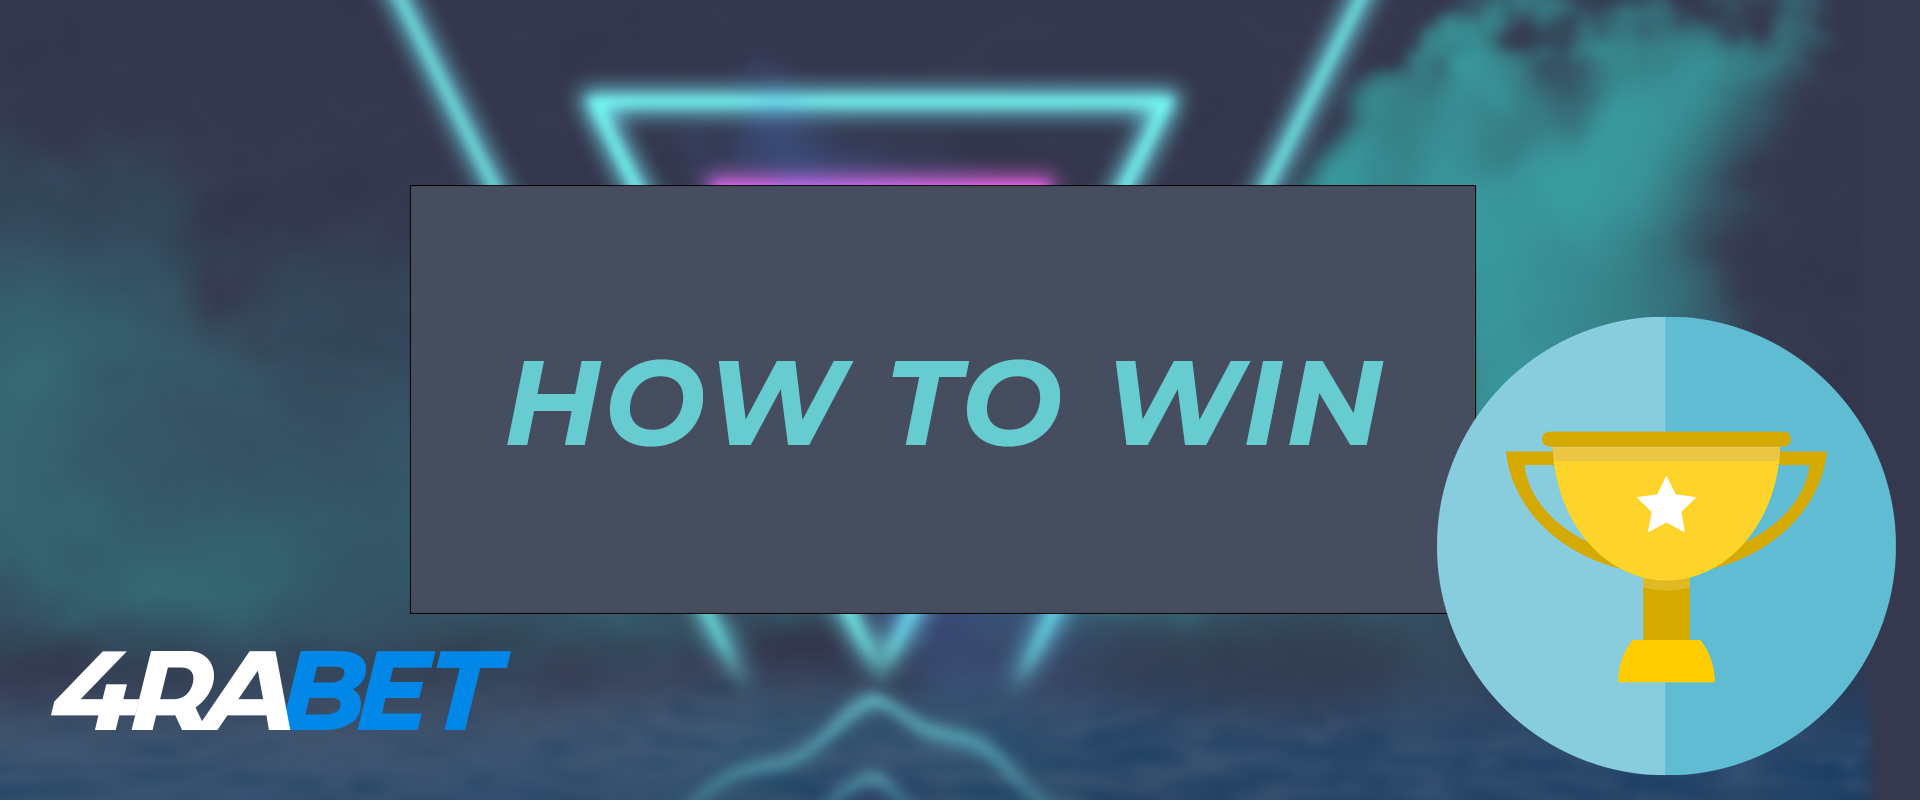 How to increase a percentage of wins 